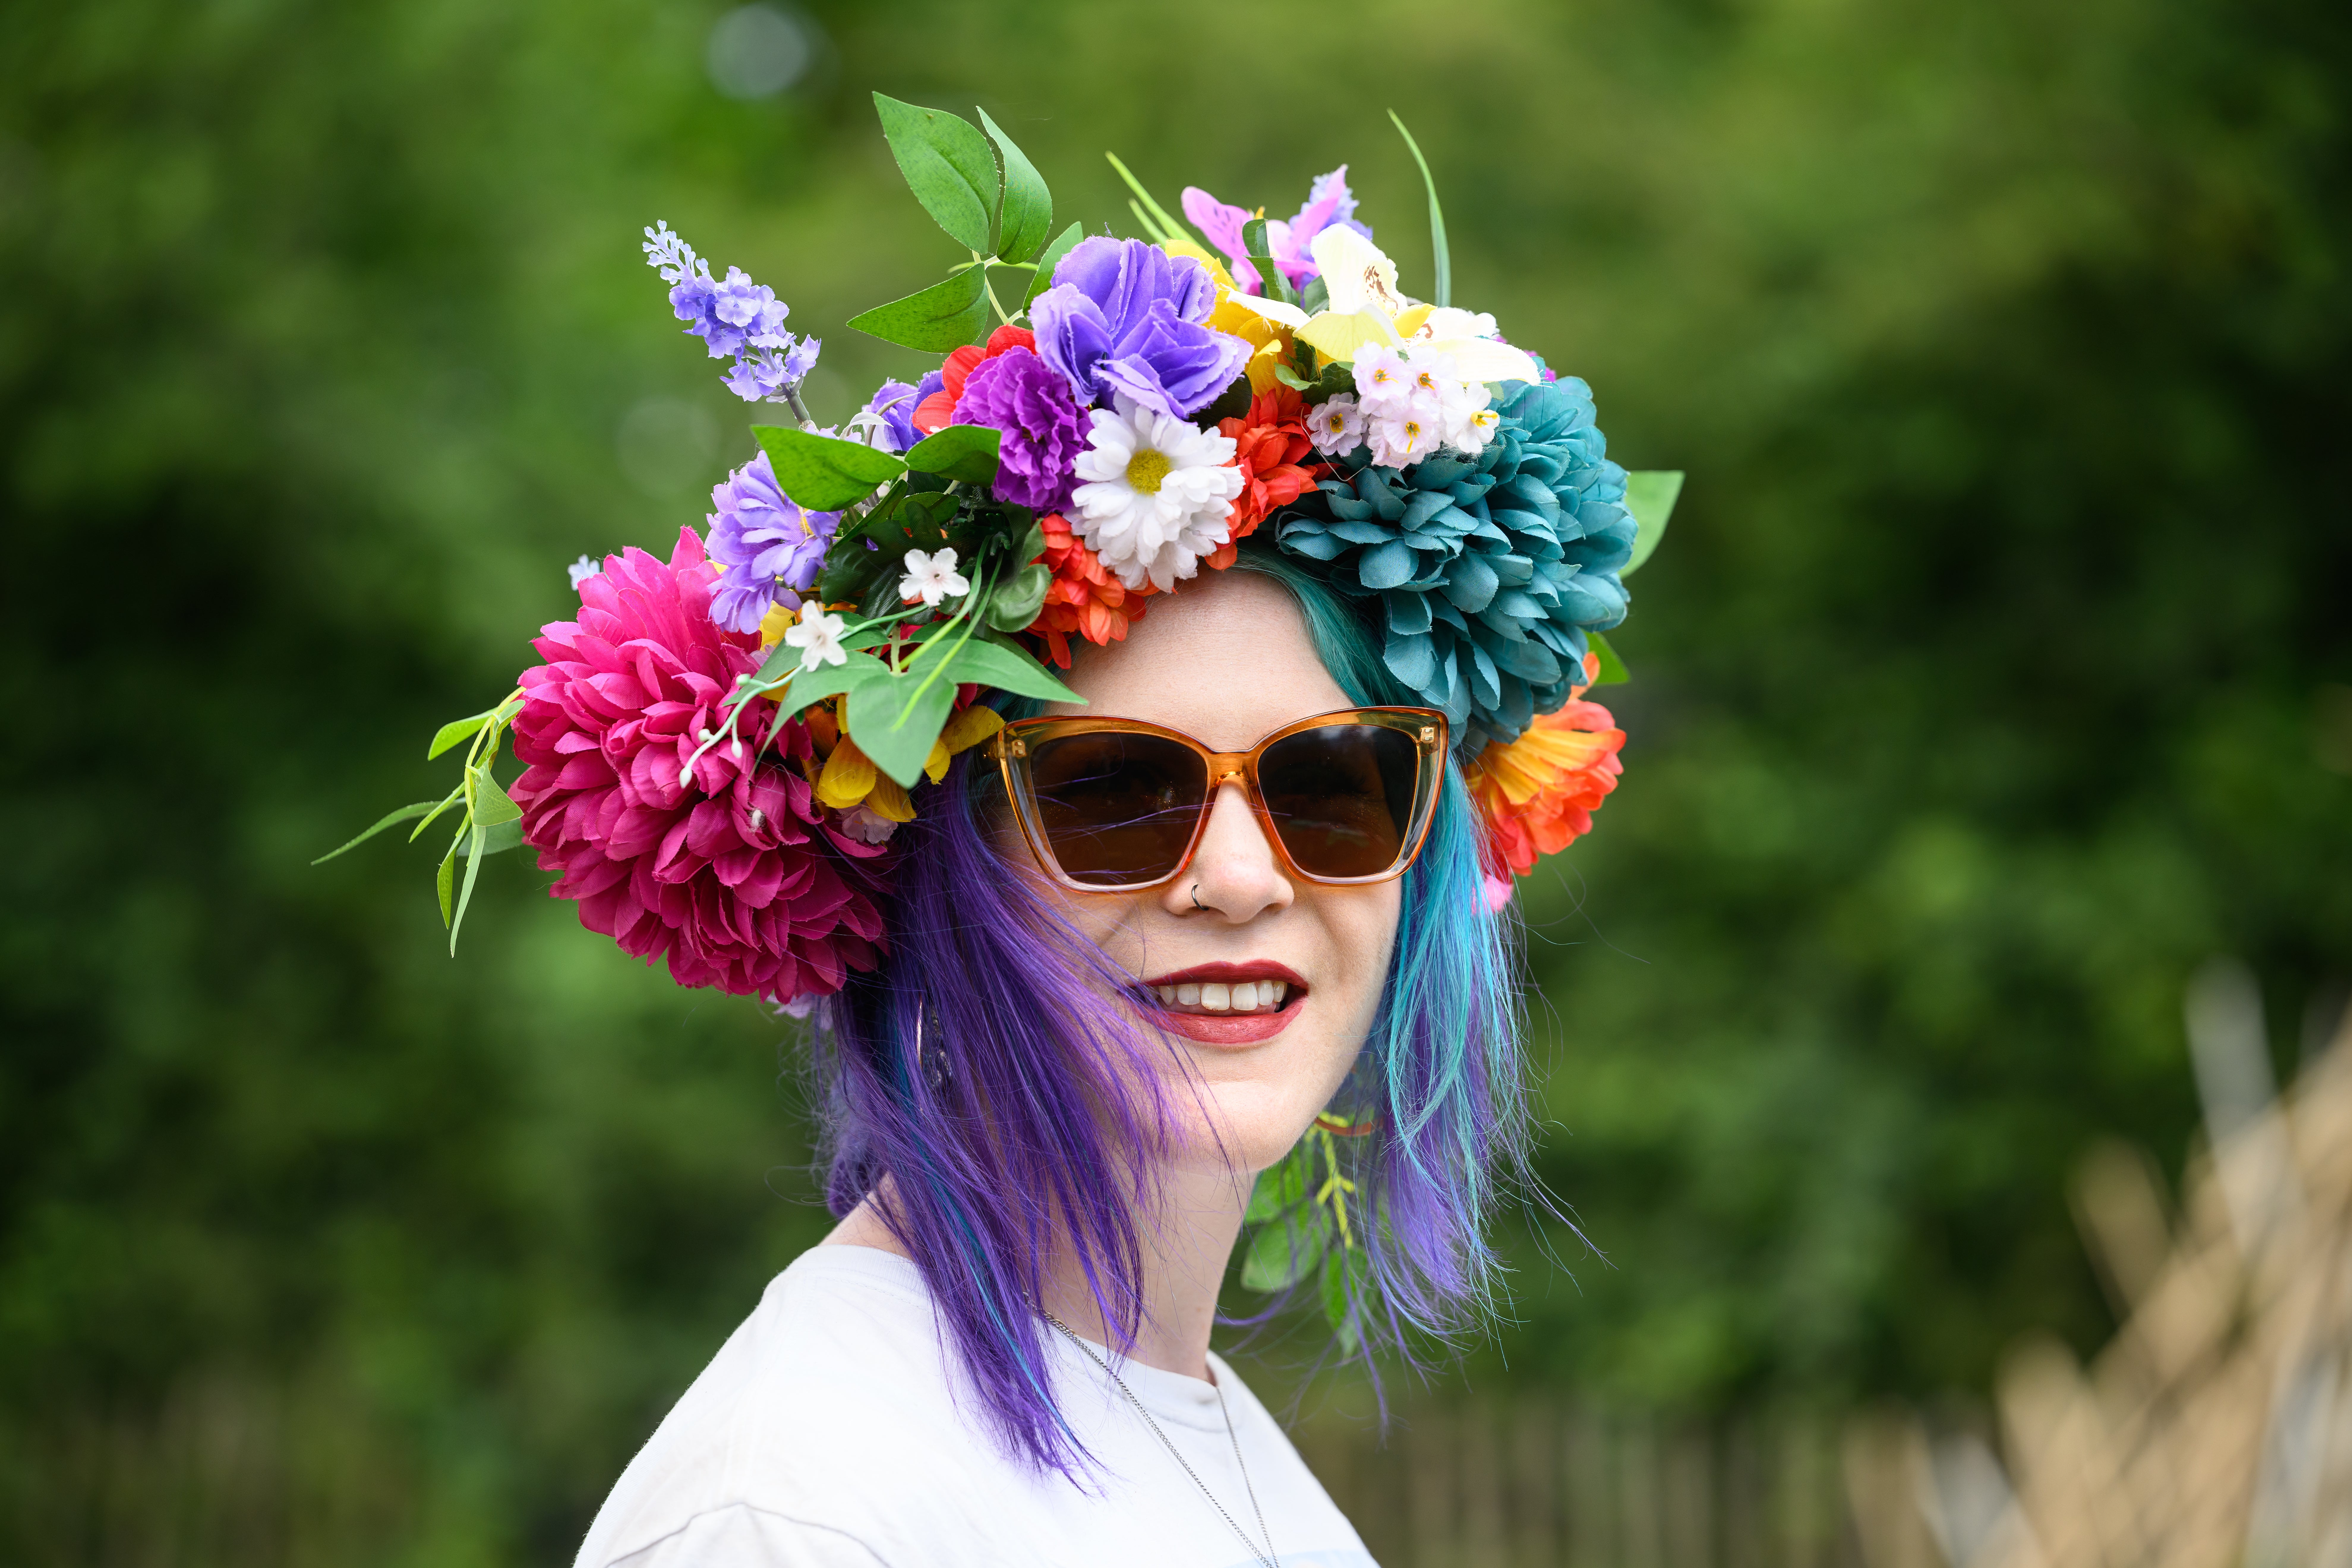 Pat Watling from the Isle of Man poses for a photo wearing her homemade floral hat on day one of Glastonbury Festival 2023